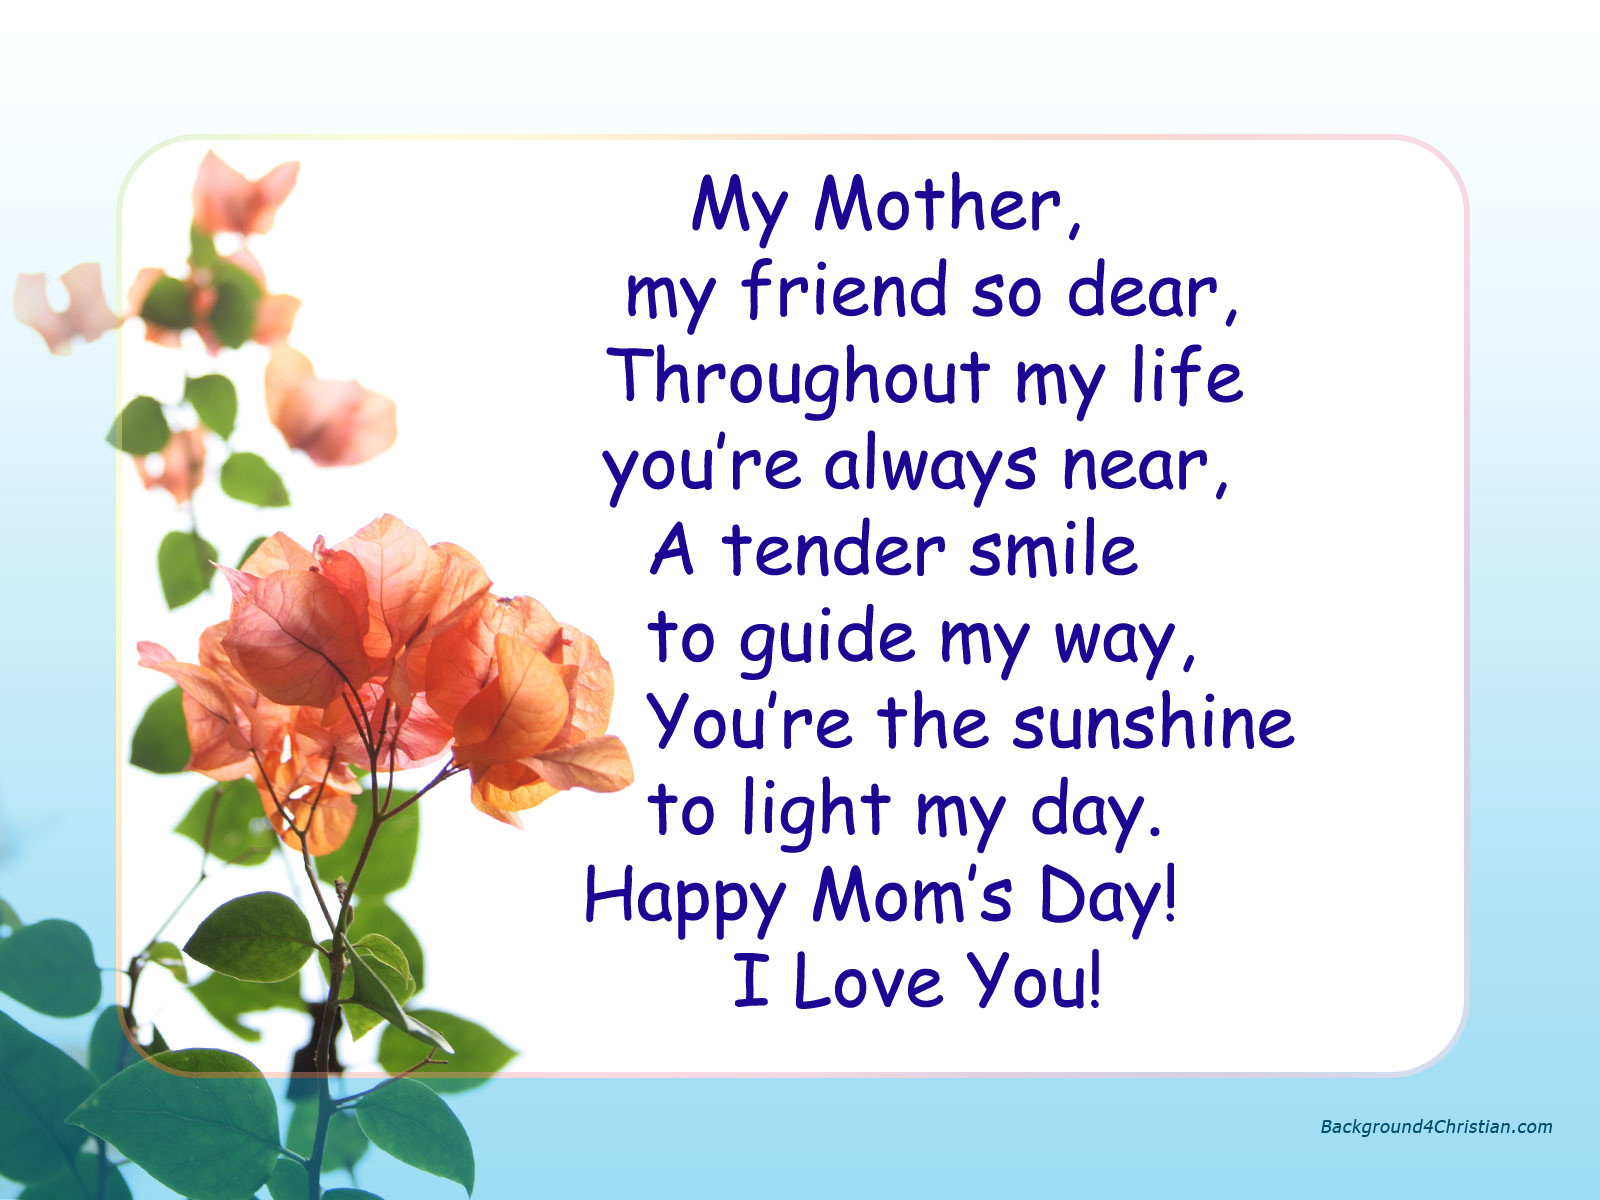 Mothers Day Pictures And Quotes
 Pool Mother s Day Quotes